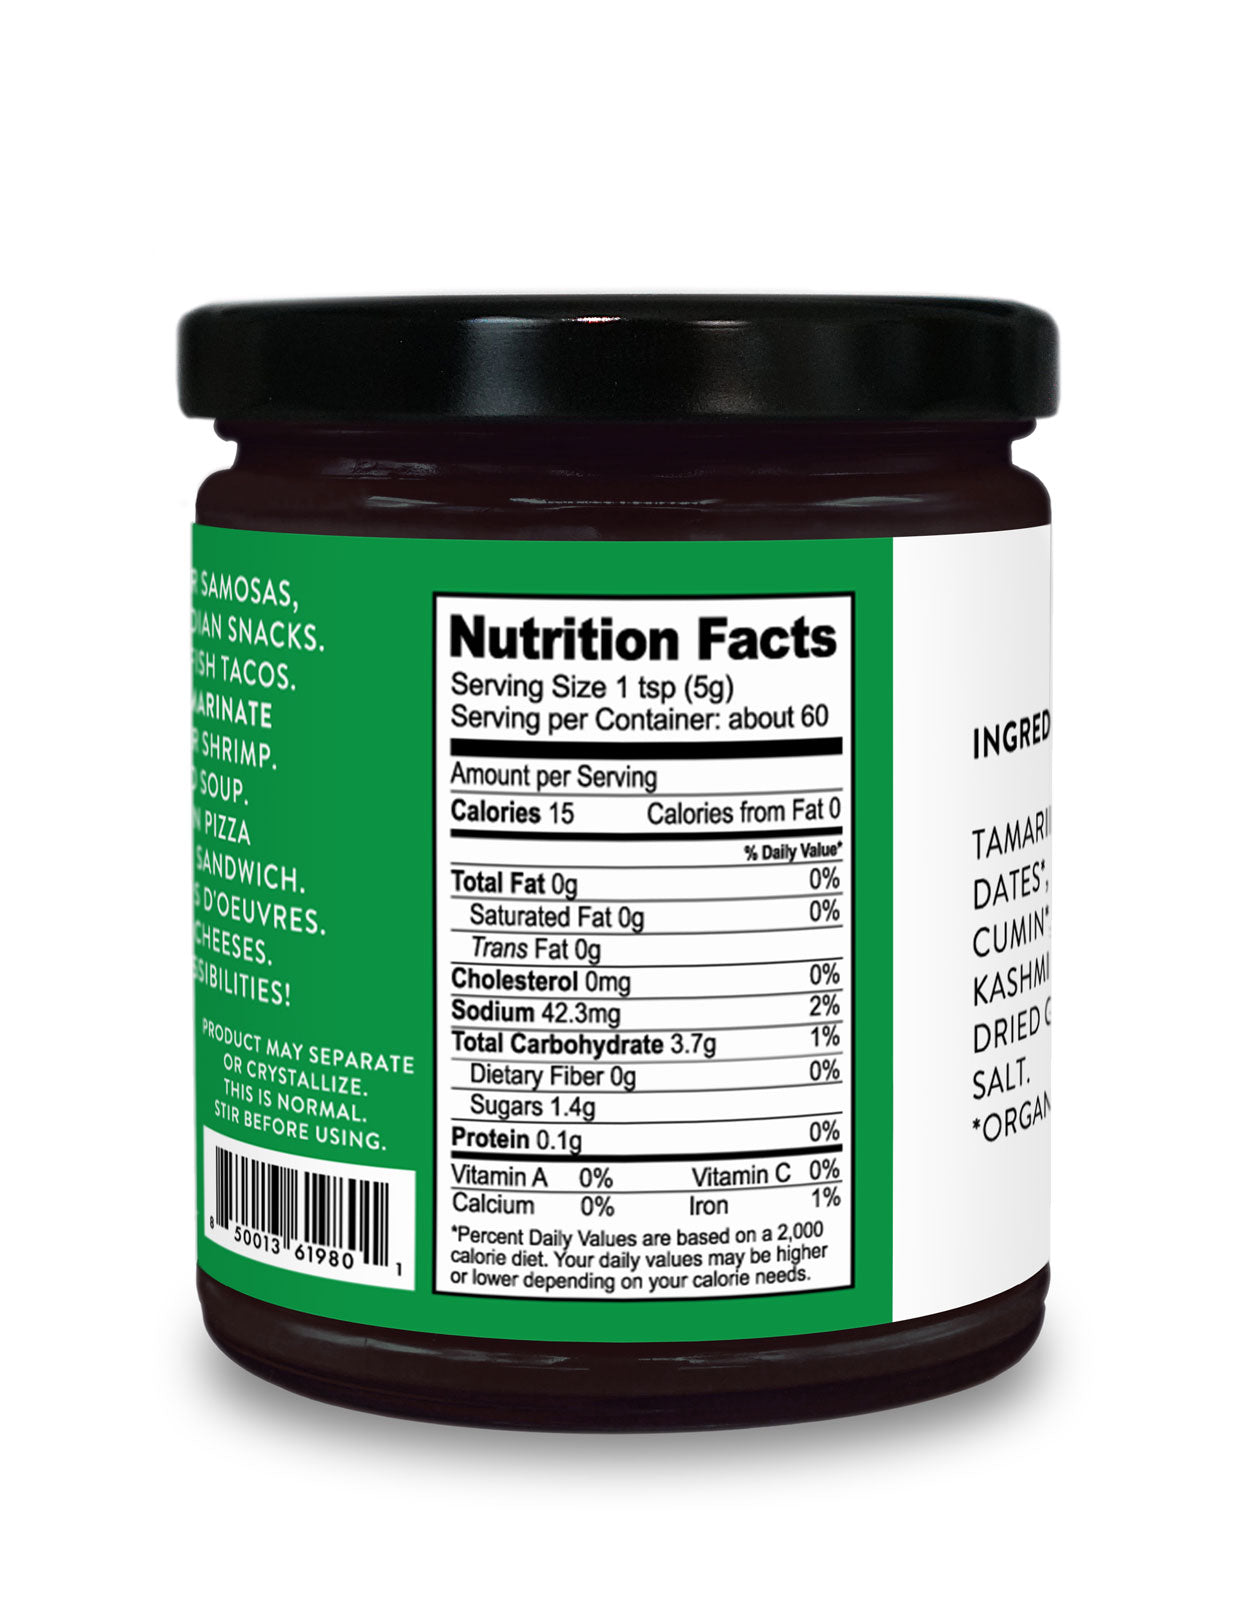 Nutrition facts Label on a jar of A Date With Tamarind, a sweet tamarind chutney from Pure Indian Foods.